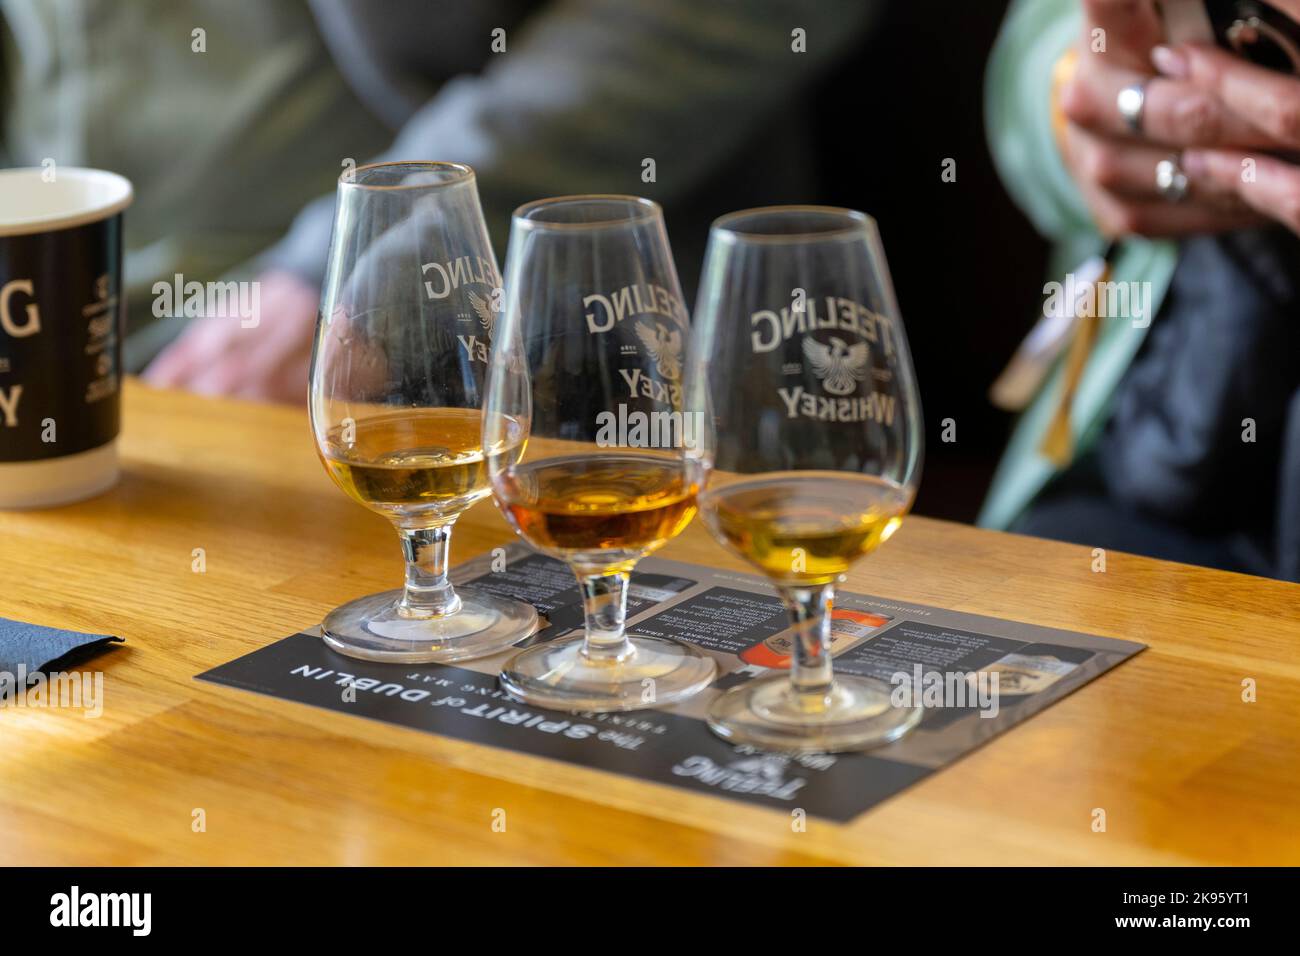 Republic of Ireland Eire Dublin Teeling Whiskey Distillery founded 1782 Golden Triangle whisky malted barley peated 3 tasting samples glasses Stock Photo